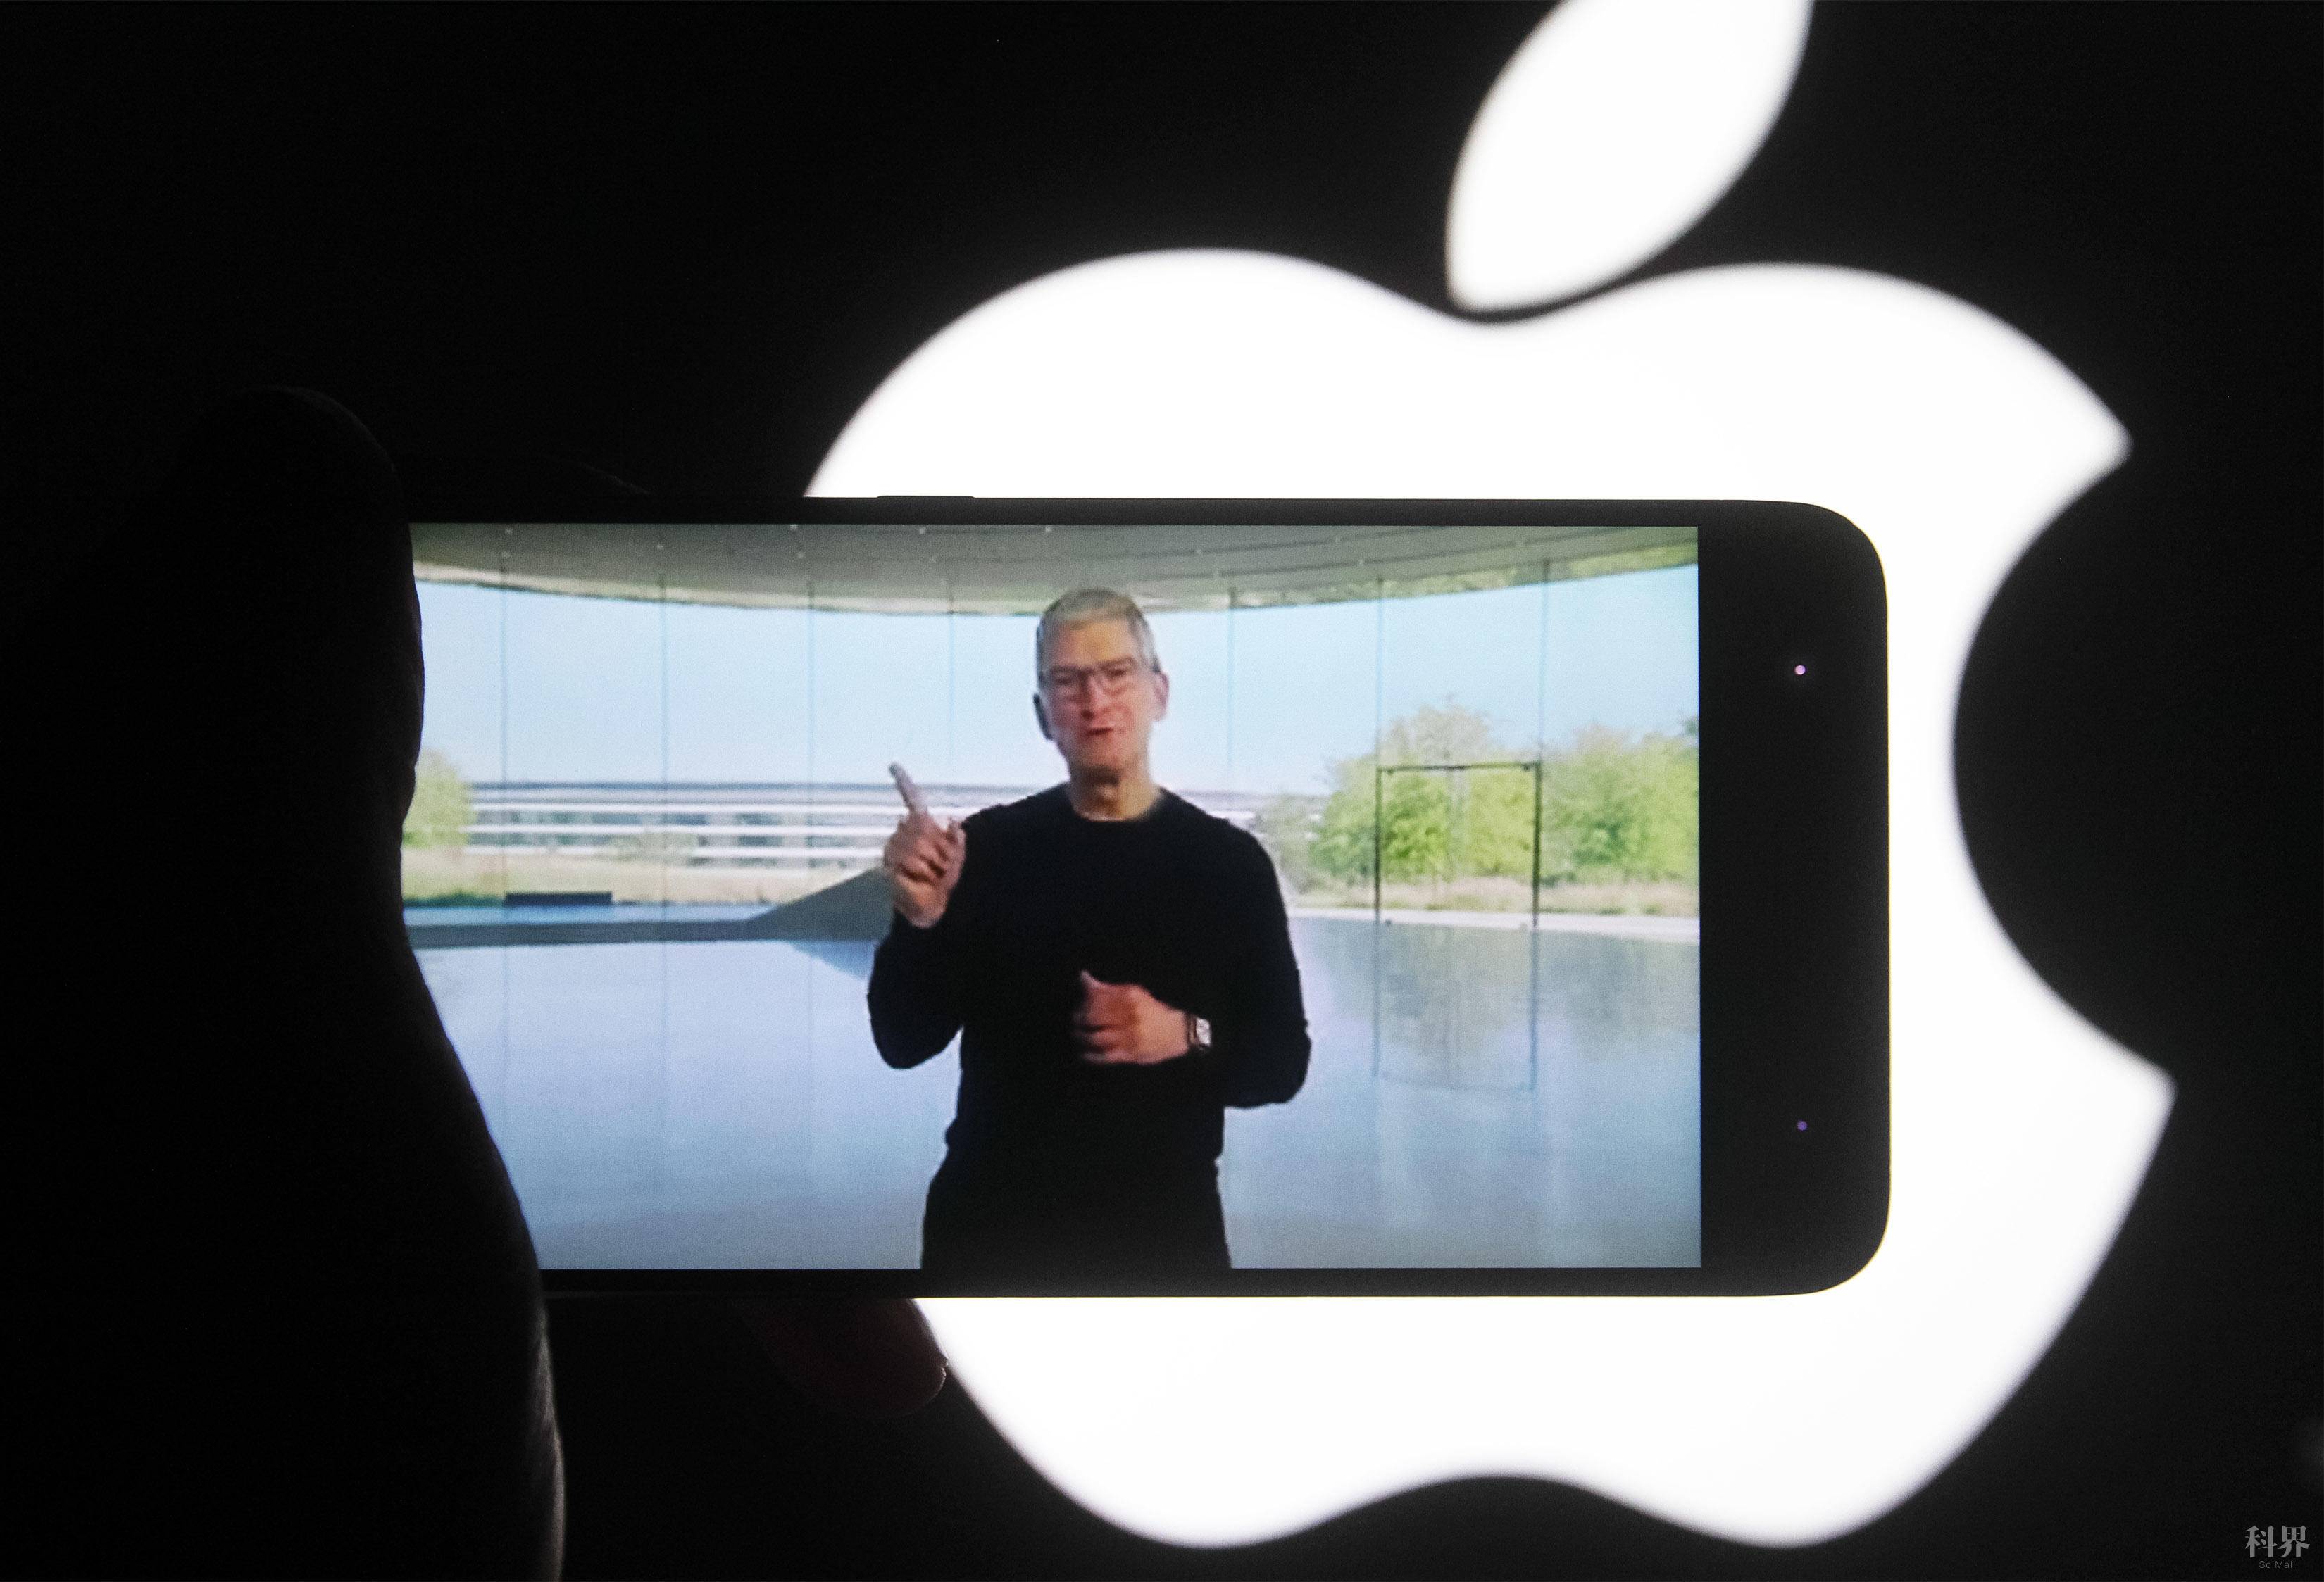 UKRAINE - 2020/10/13: In this photo illustration a screenshot of Apple's CEO Tim Cook from Apple's launch promotional material of the the new iPhone12 seen displayed on a smartphone screen with the apple logo in the background. (Photo Illustration by Pavlo Gonchar/SOPA Images/LightRocket via Getty Images)